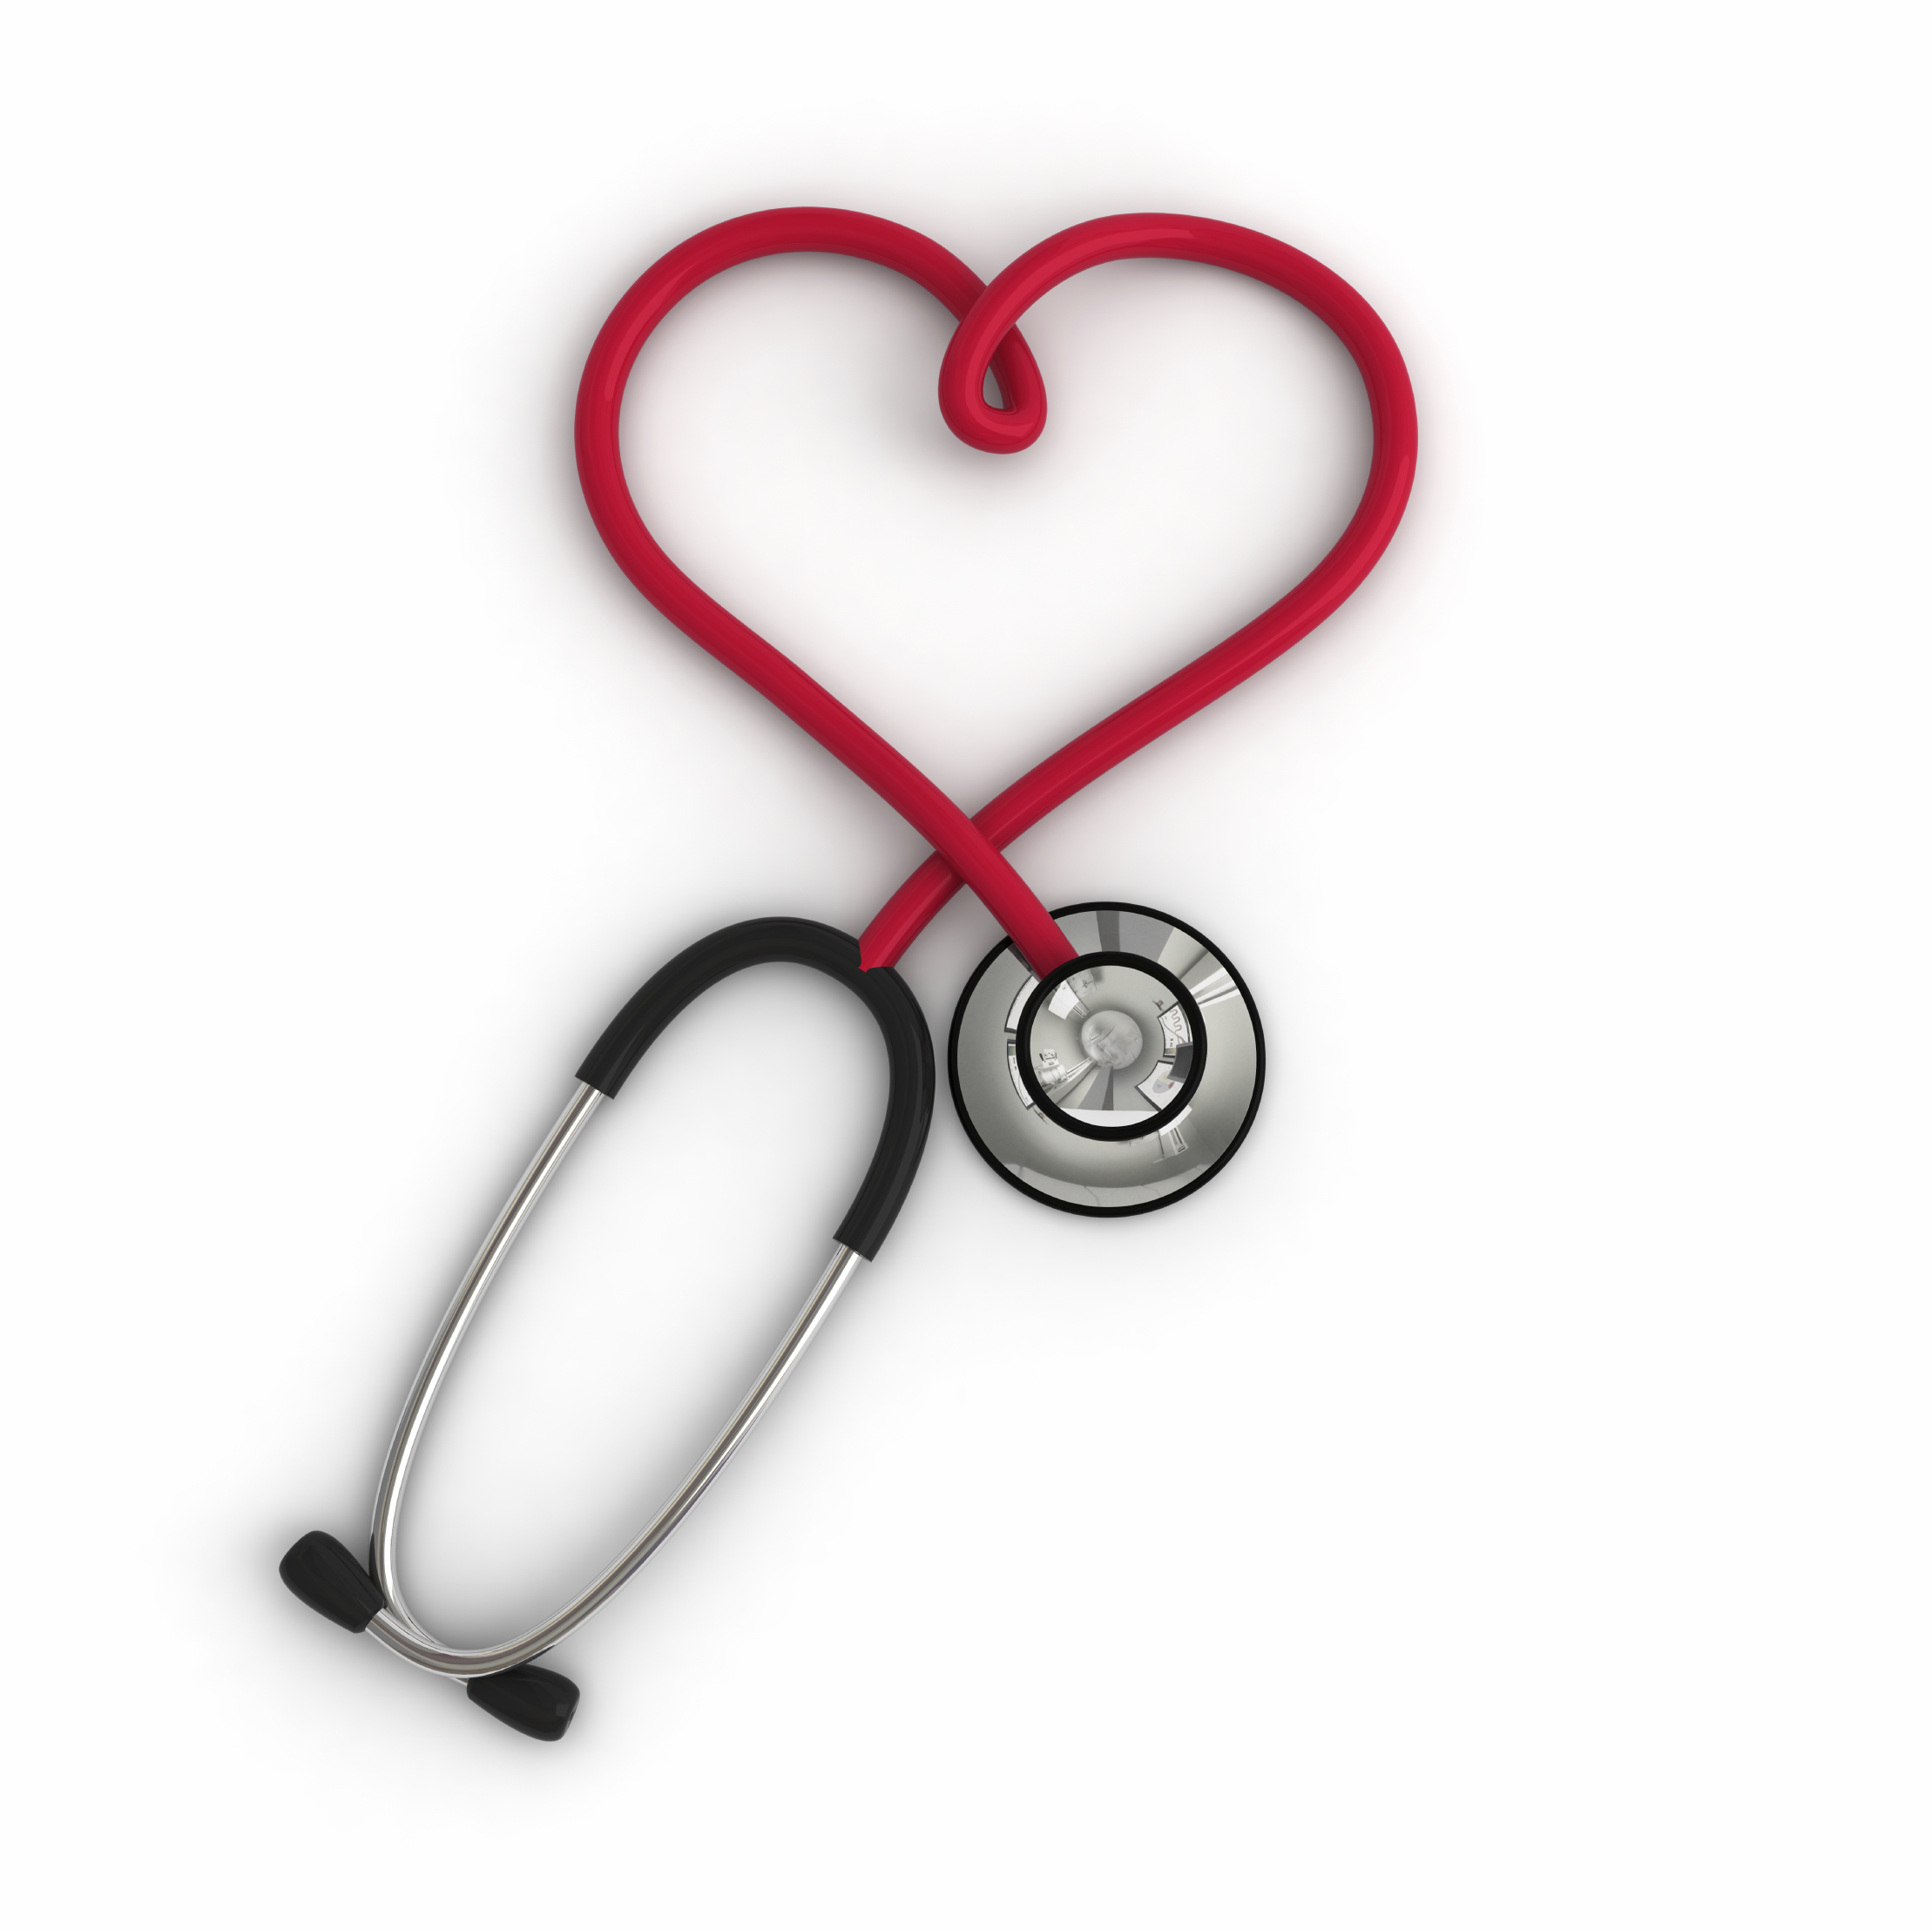 Stethoscope Heart Free Cliparts That You Can Download To You    